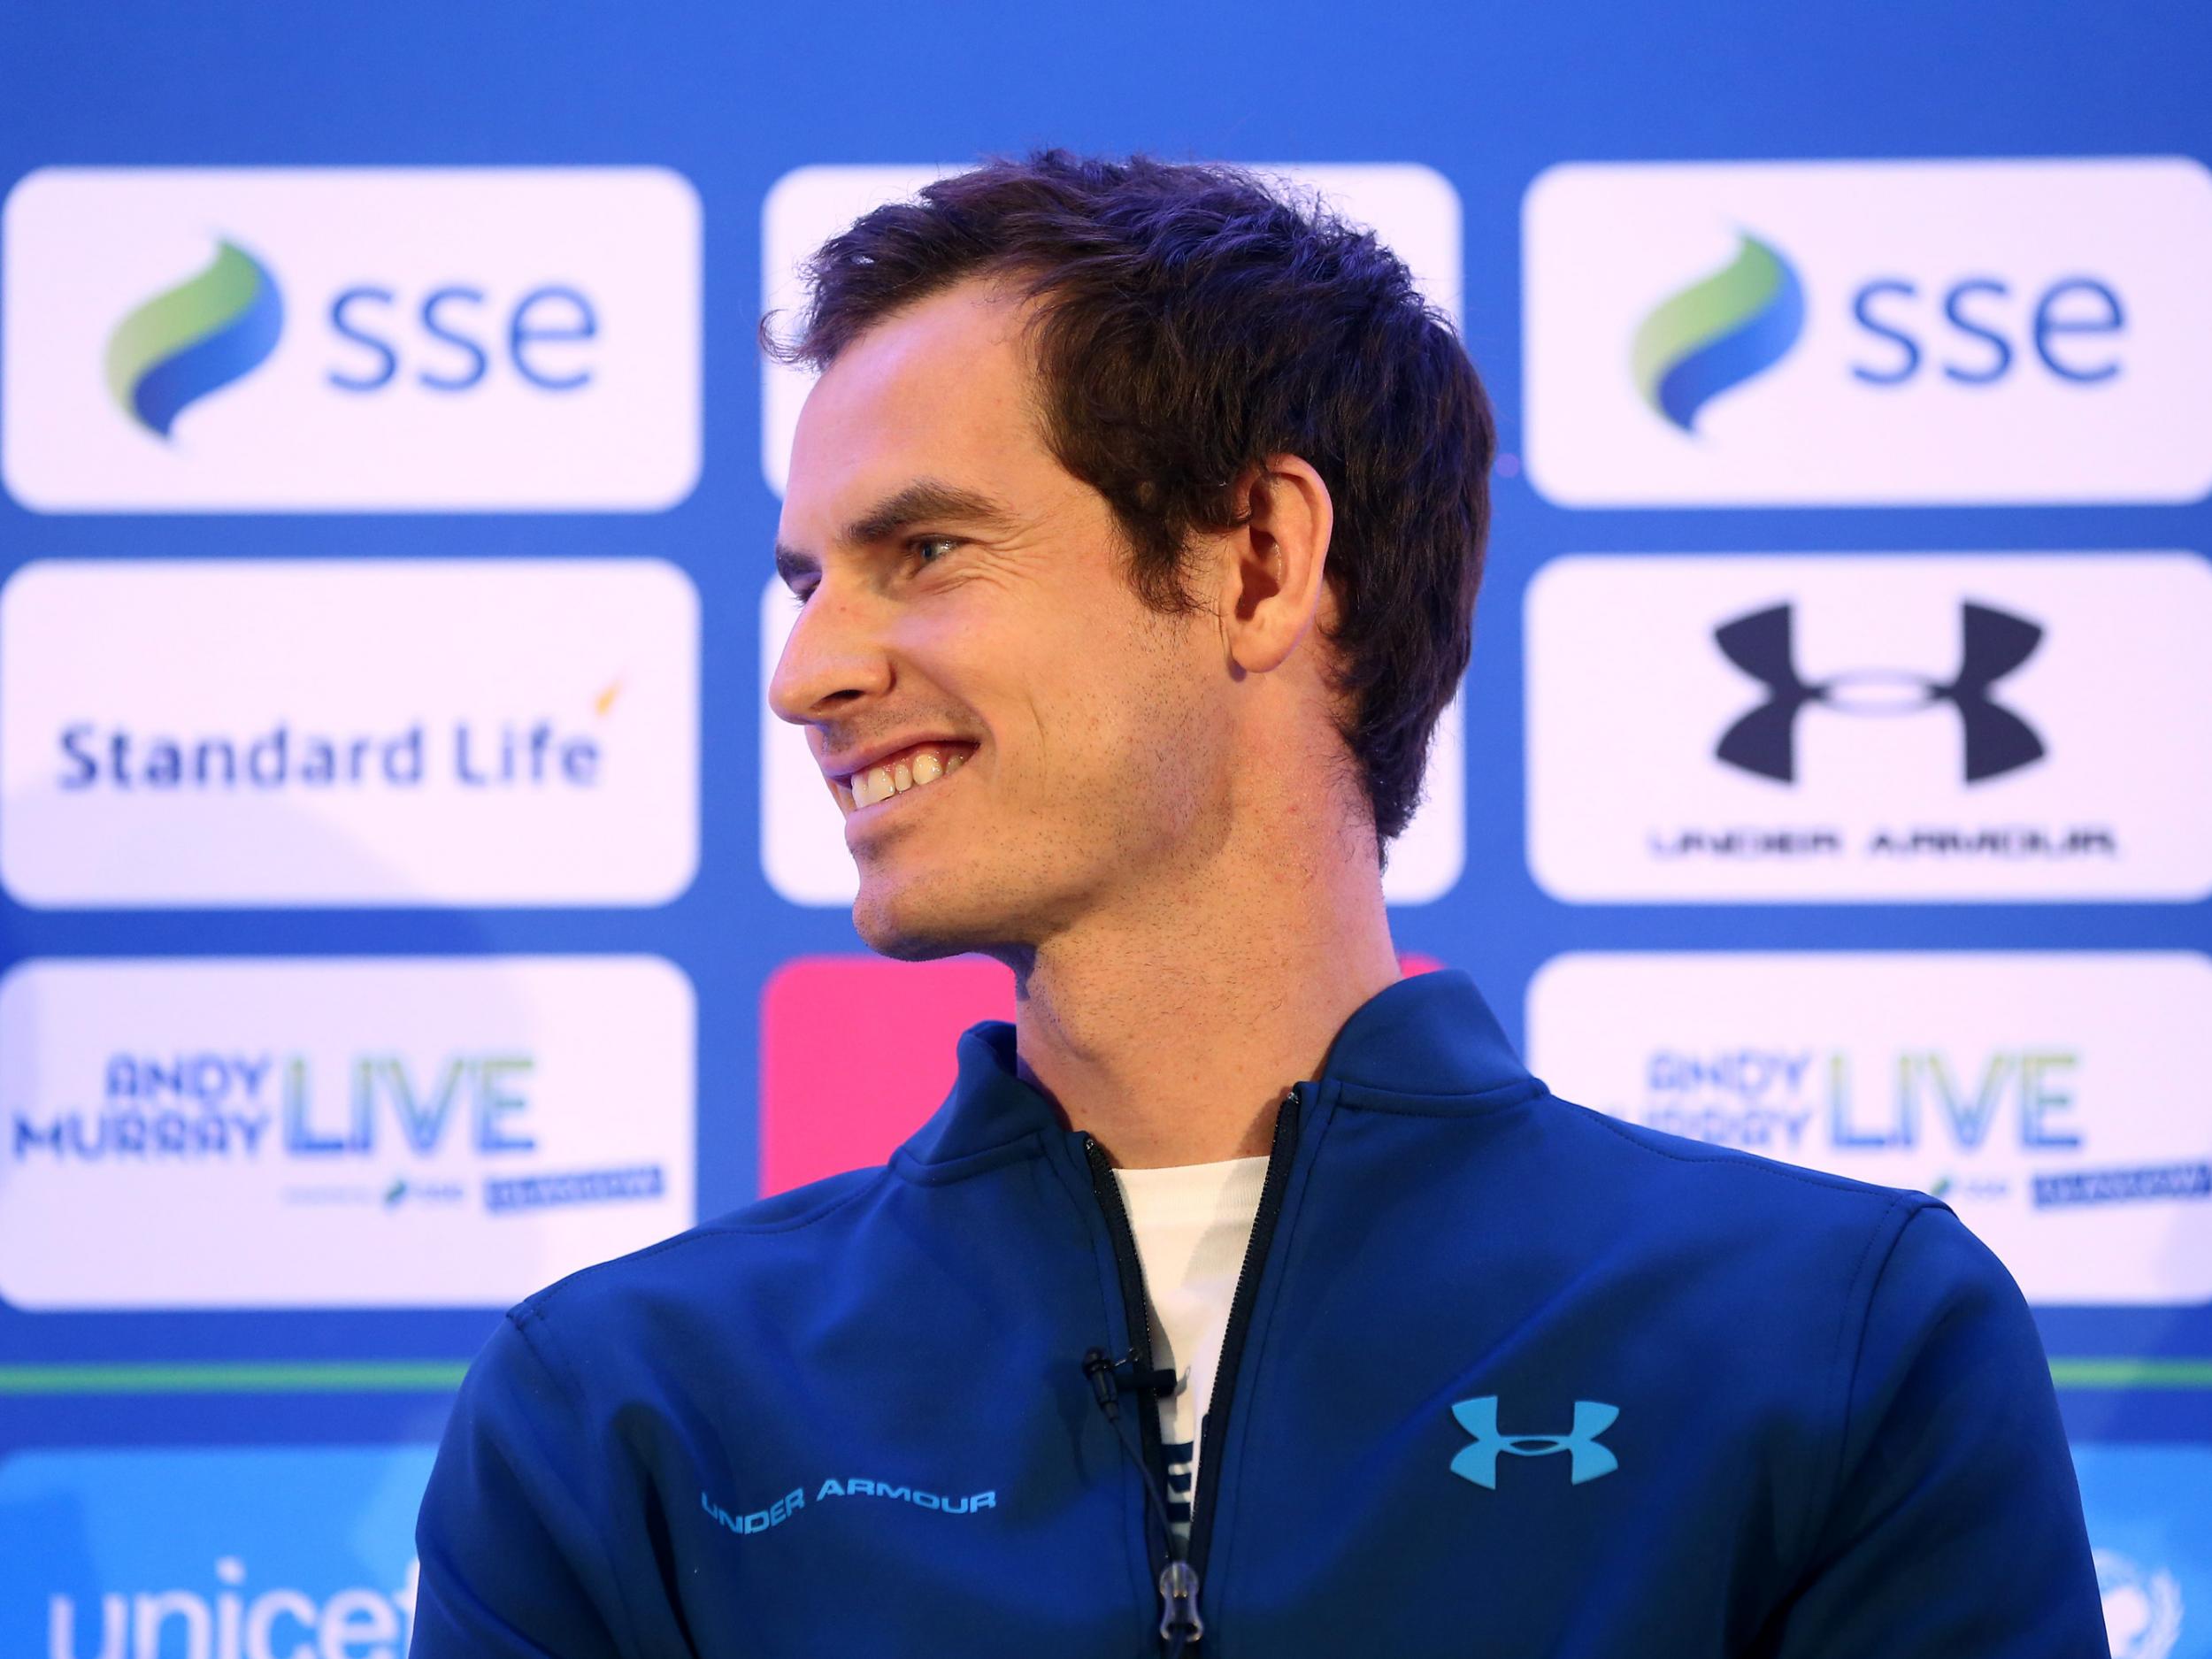 'Andy Murray Live' was staged in Glasgow for the first time last year